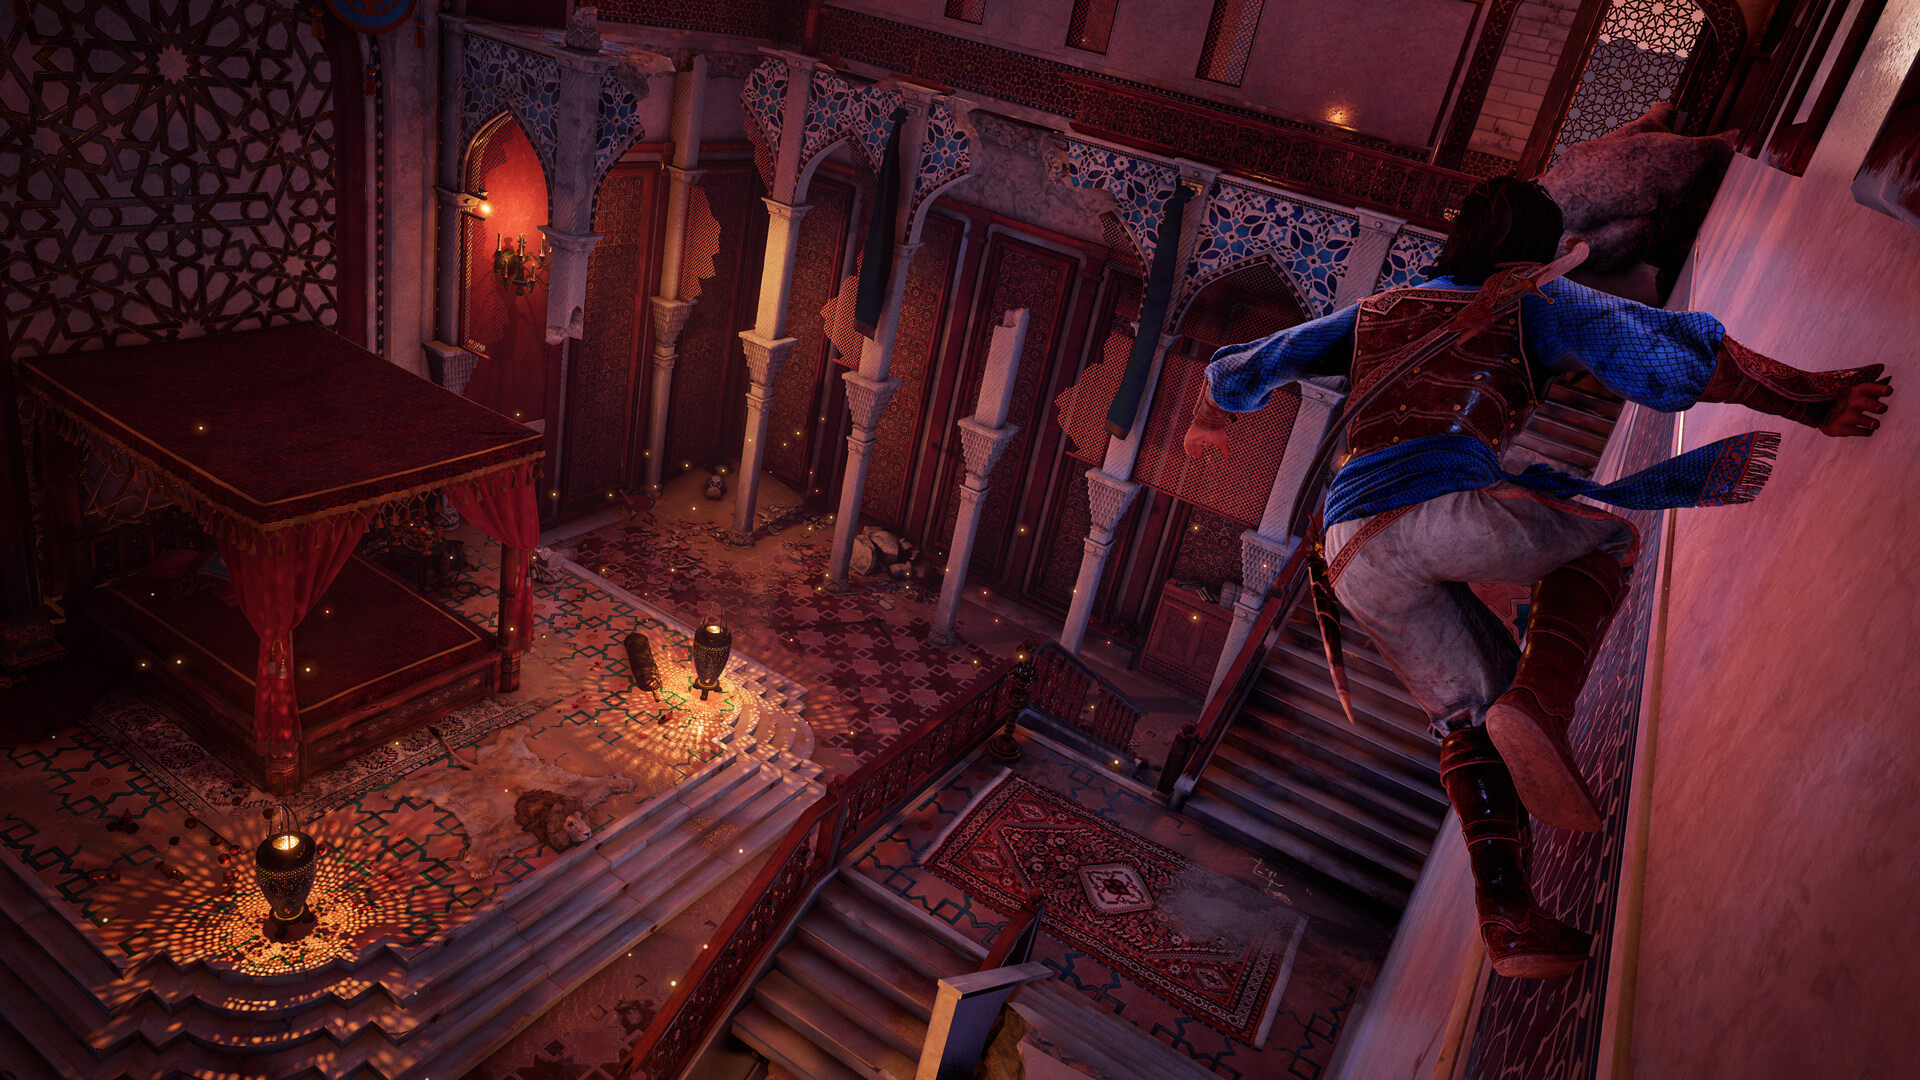 Prince of Persia: The Sands of Time Review - GameSpot